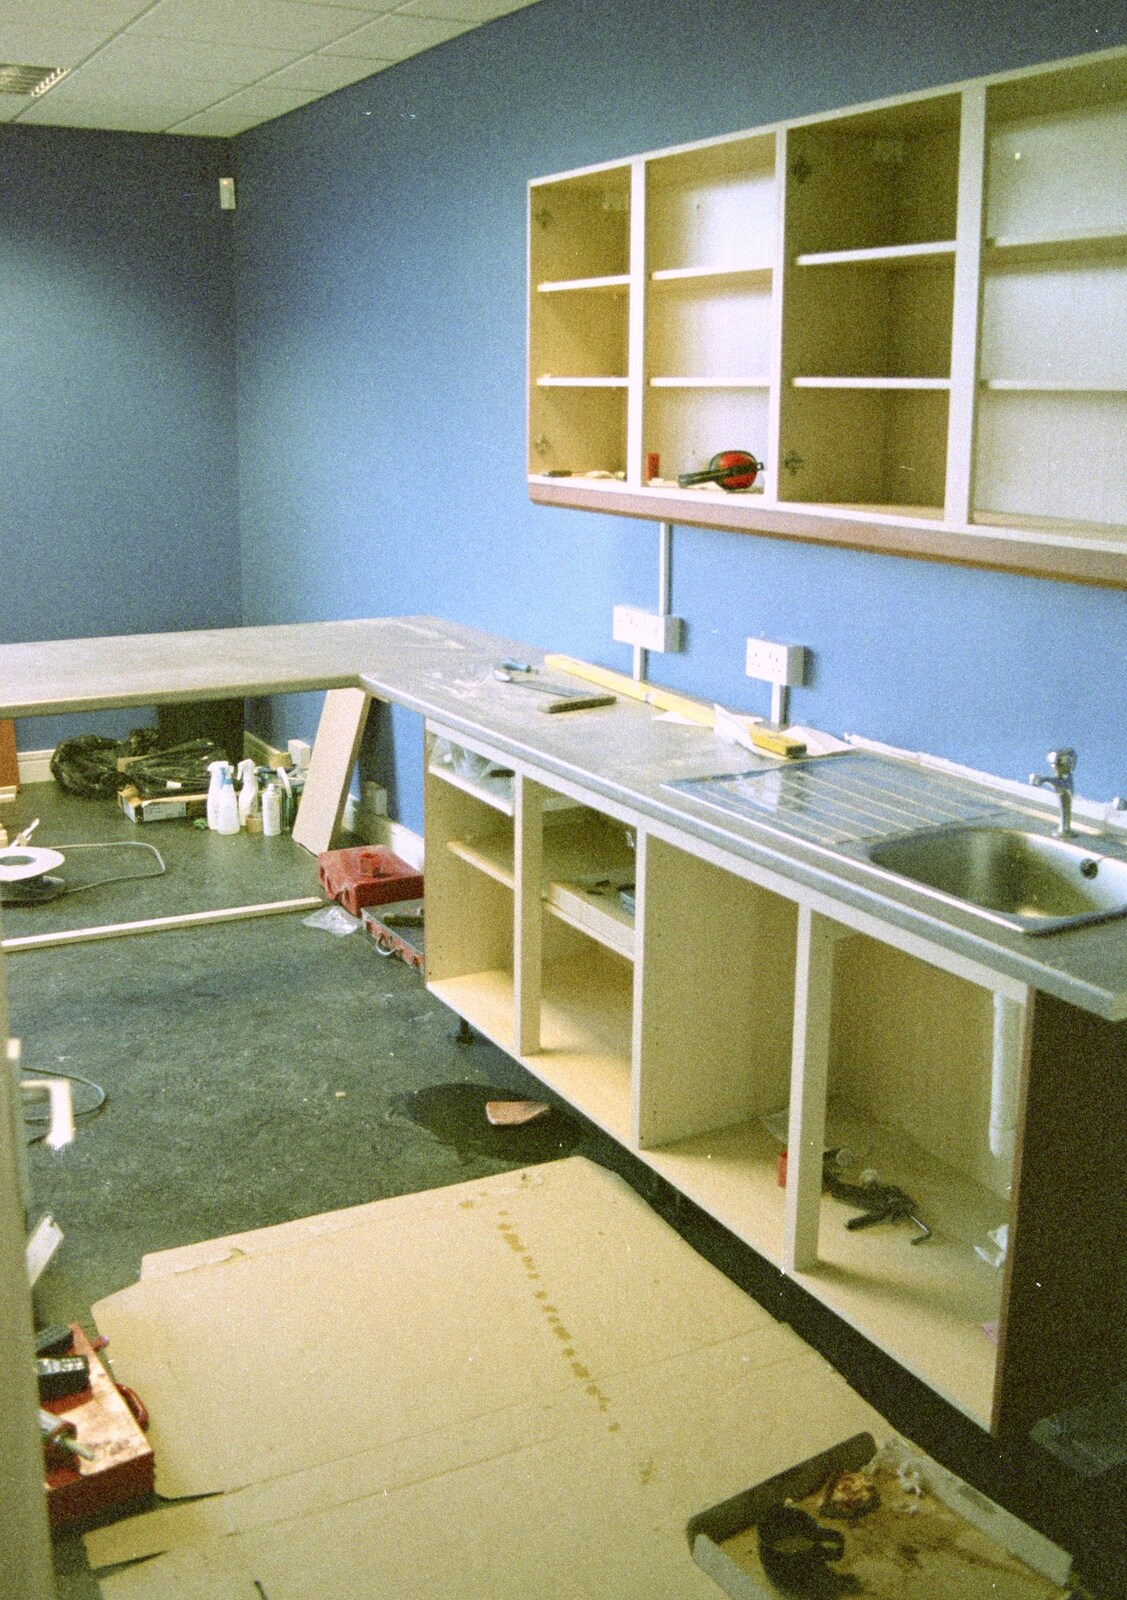 The Matrix House kitchen from 3G Lab Moves Offices, Milton Road, Cambourne and Cambridge - 27th August 2001